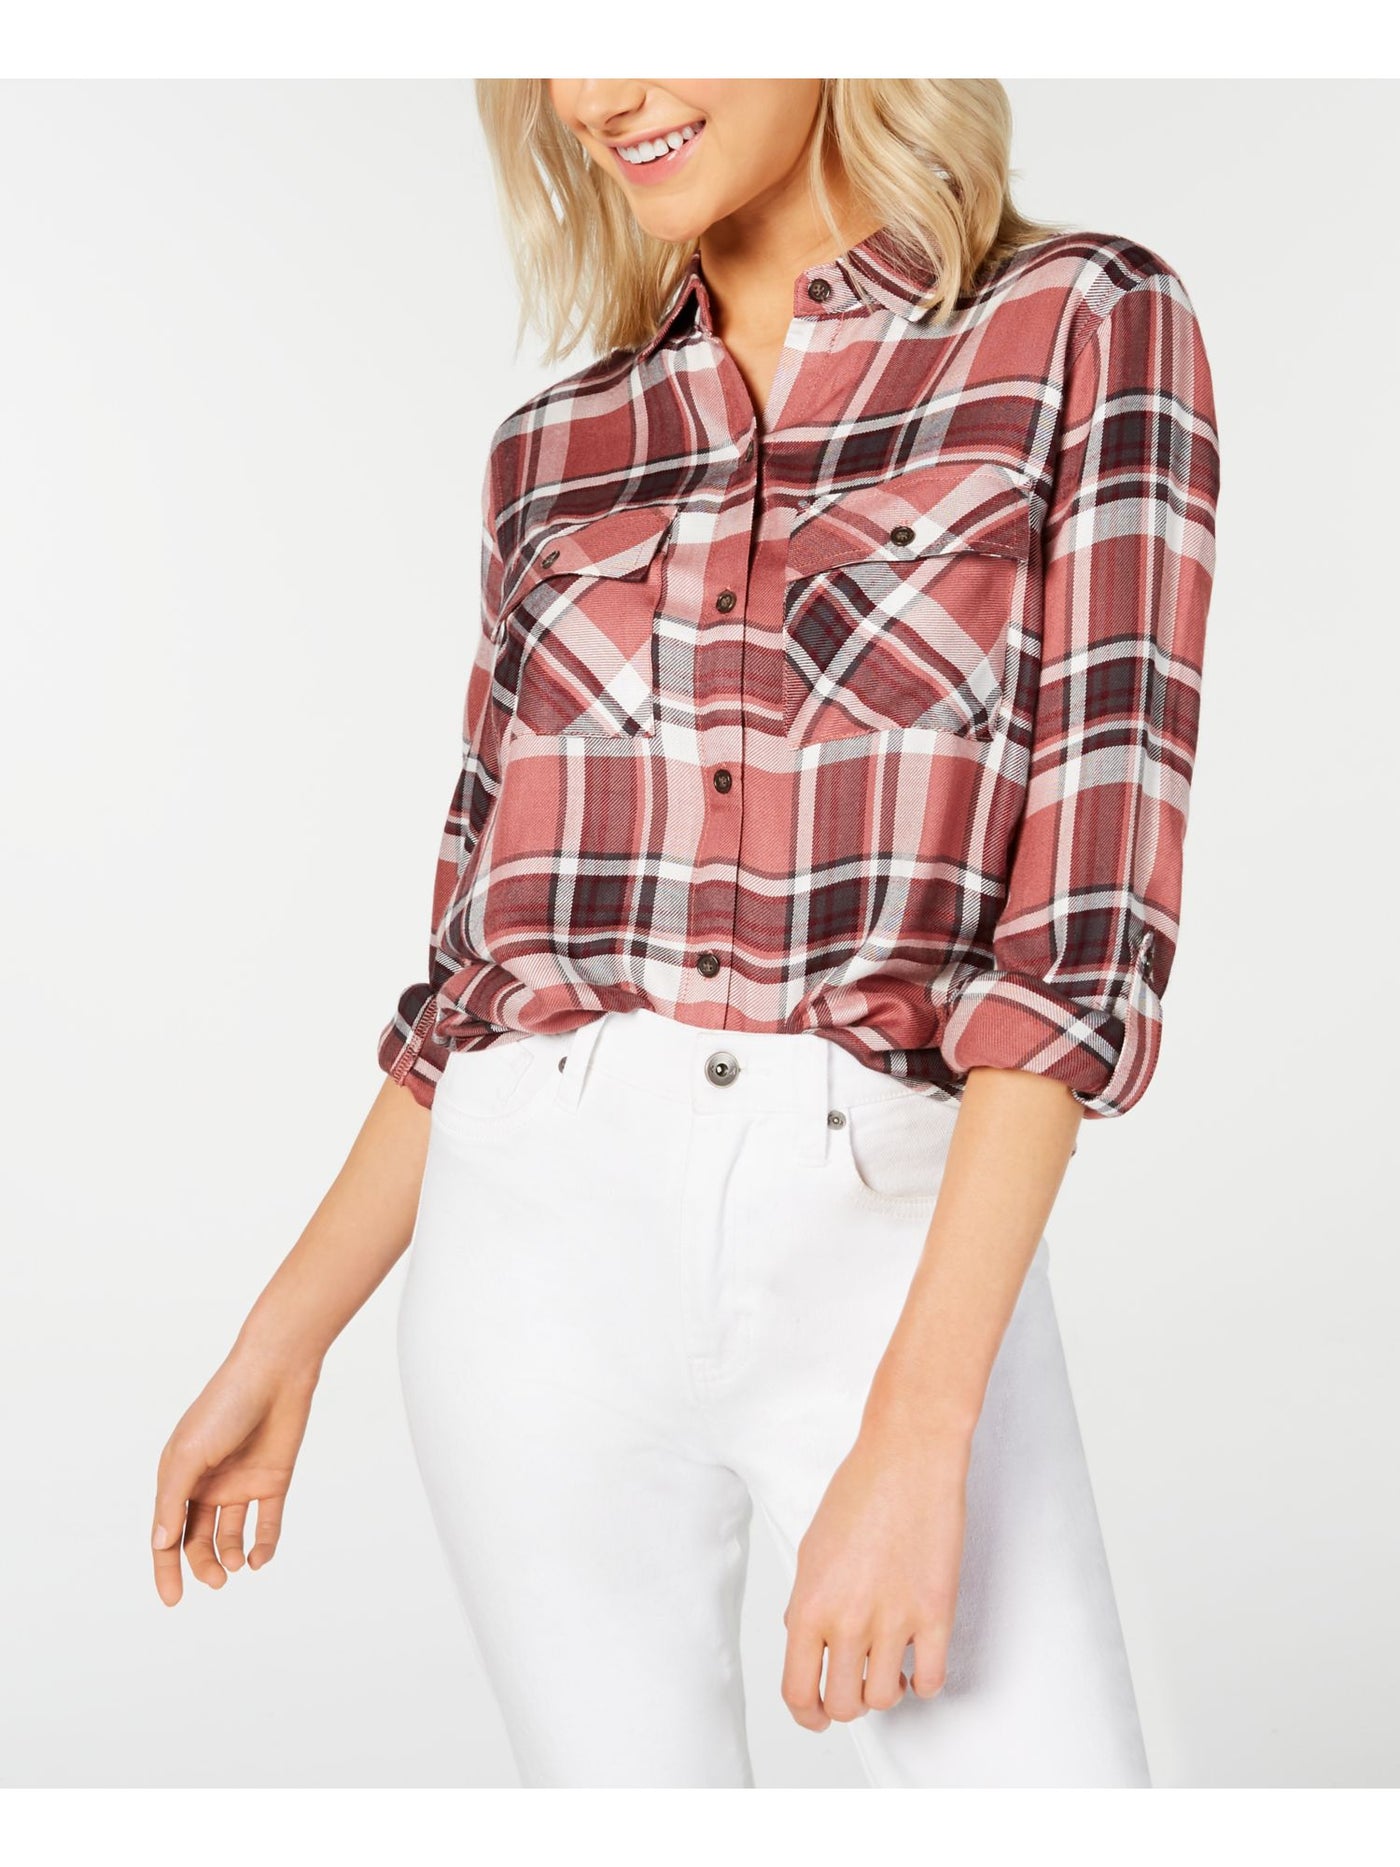 POLLY & ESTHER Womens Red Plaid Roll-tab Sleeve Collared Button Up Top L